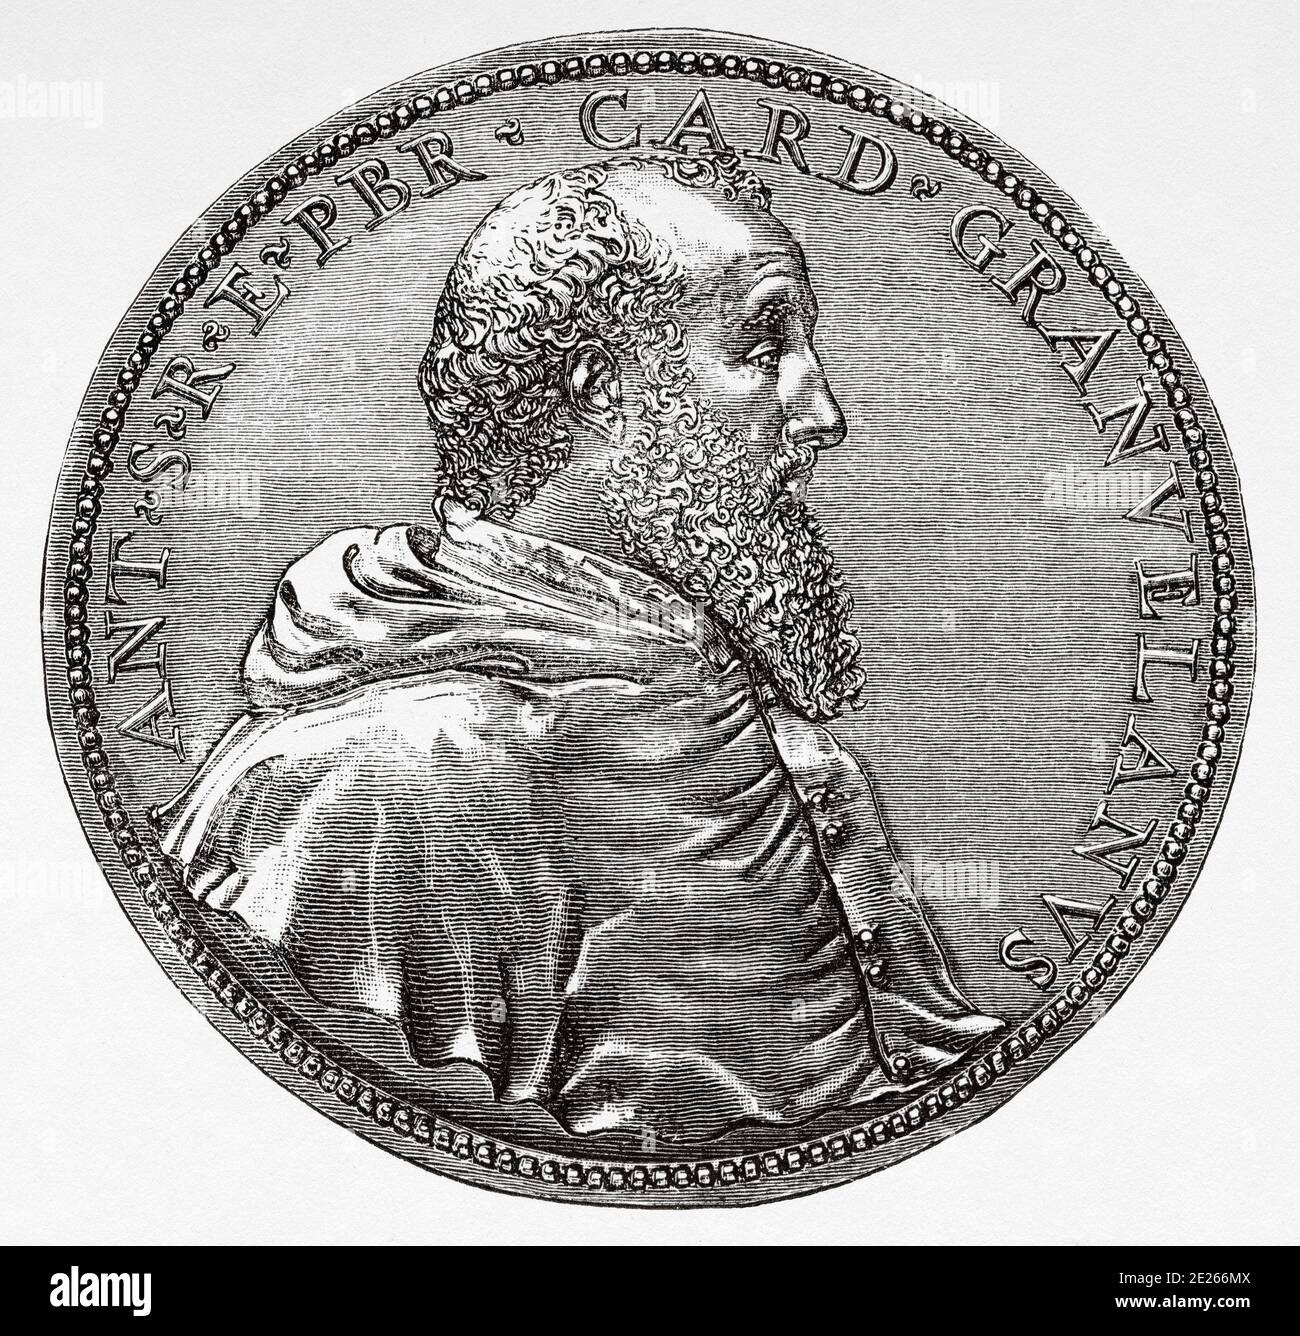 Portrait medal of Antoine Perrenot Granvelle (Besançon; August 20, 1517 - Madrid; September 21, 1586). Cardinal of the Catholic Church and statesman from the Franche-Comté, was at the service of the Spanish Austrias. Bishop of Arrás and archbishop of Mechelen and Besançon. Medal of the time. History of Philip II of Spain. Old engraving published in Historia de Felipe II by H. Forneron, in 1884 Stock Photo